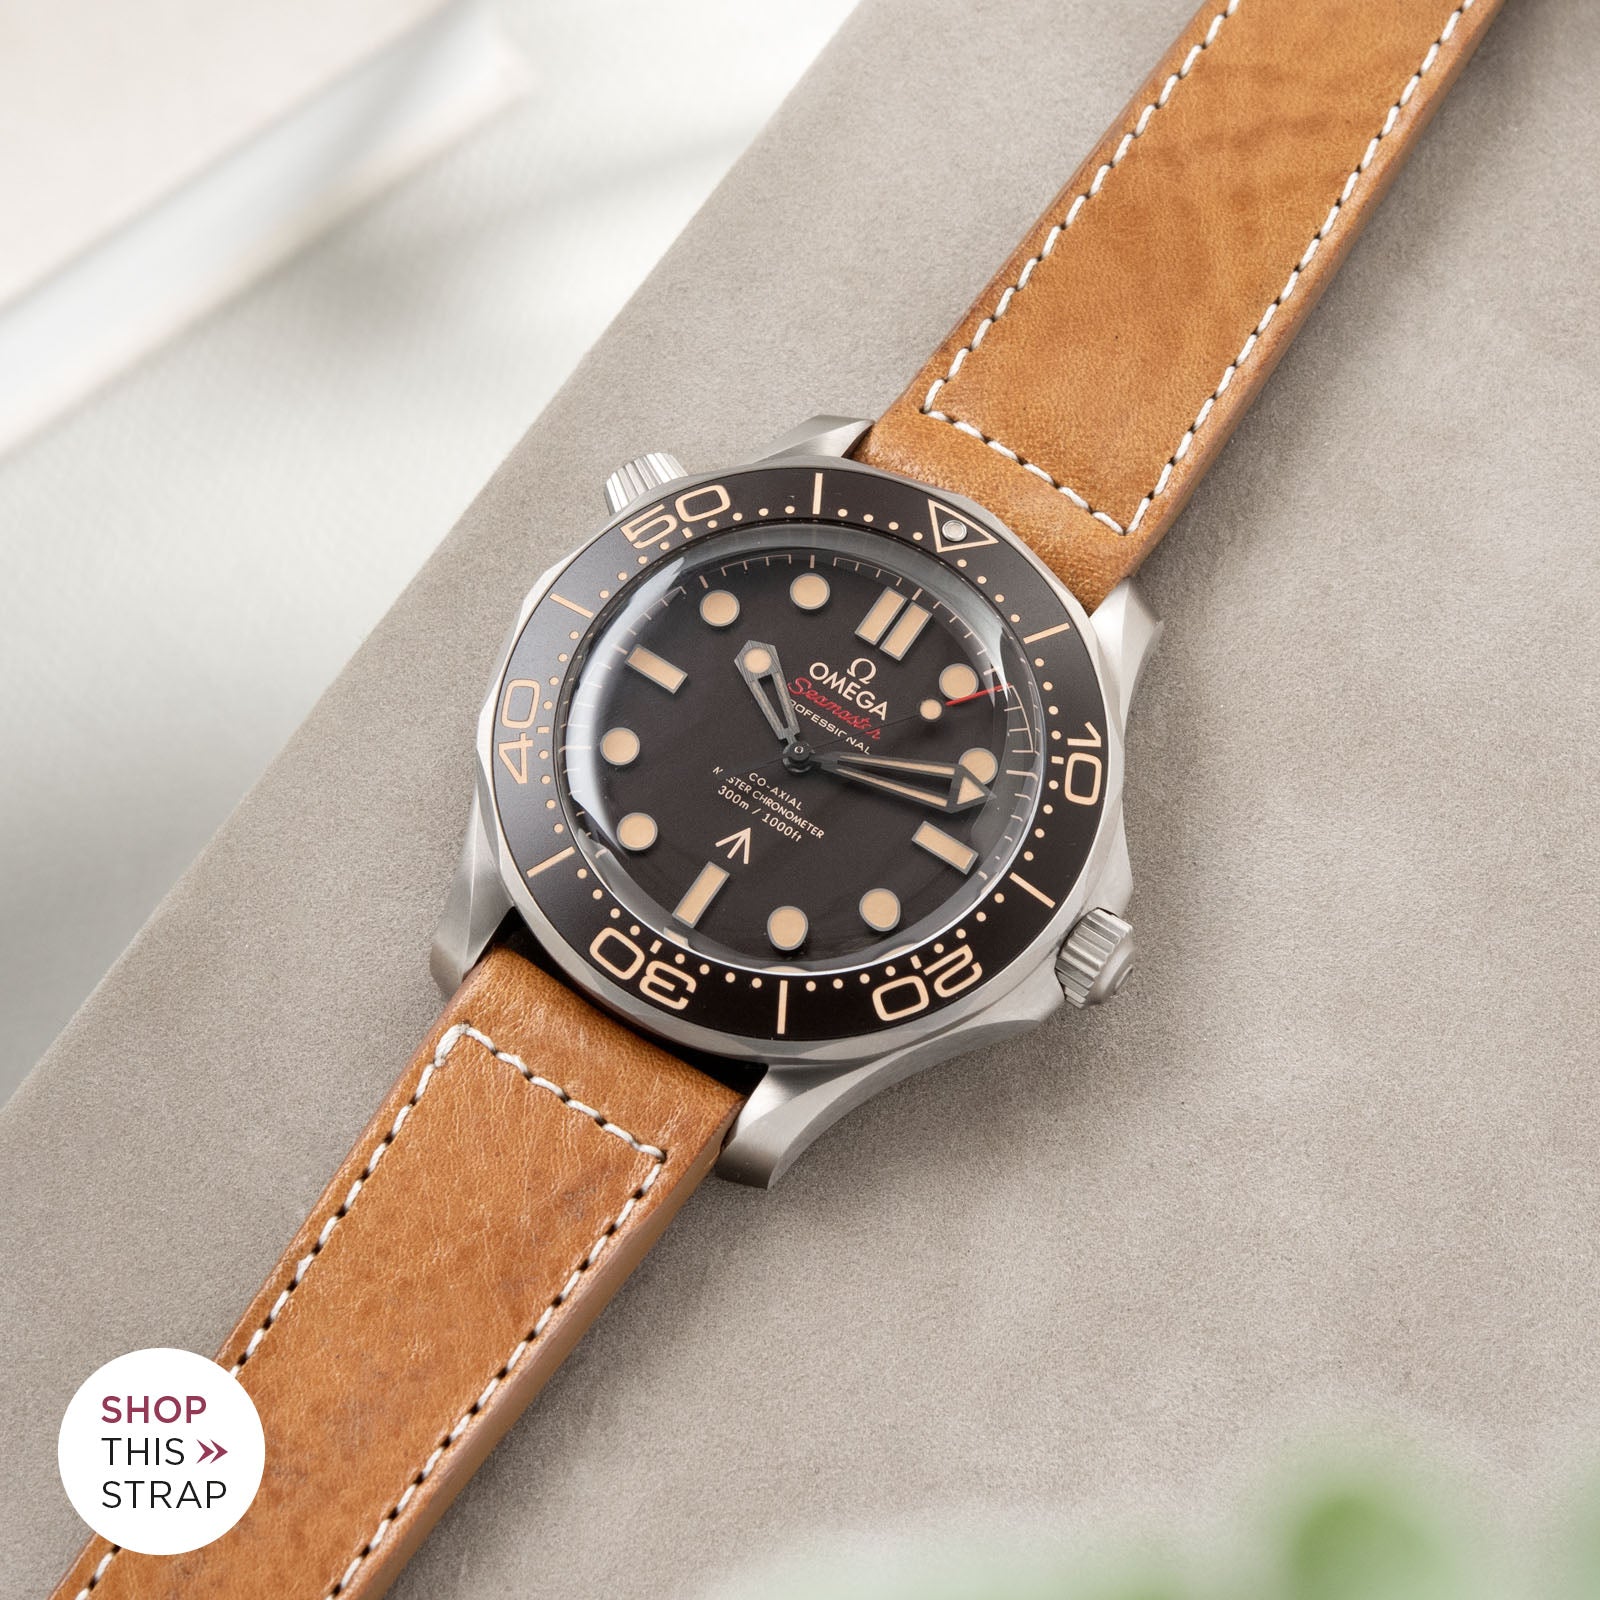 Bulang and Sons_Strap Guide_The Omega Seamaster James Bond_Gilt Brown Leather Watch Strap